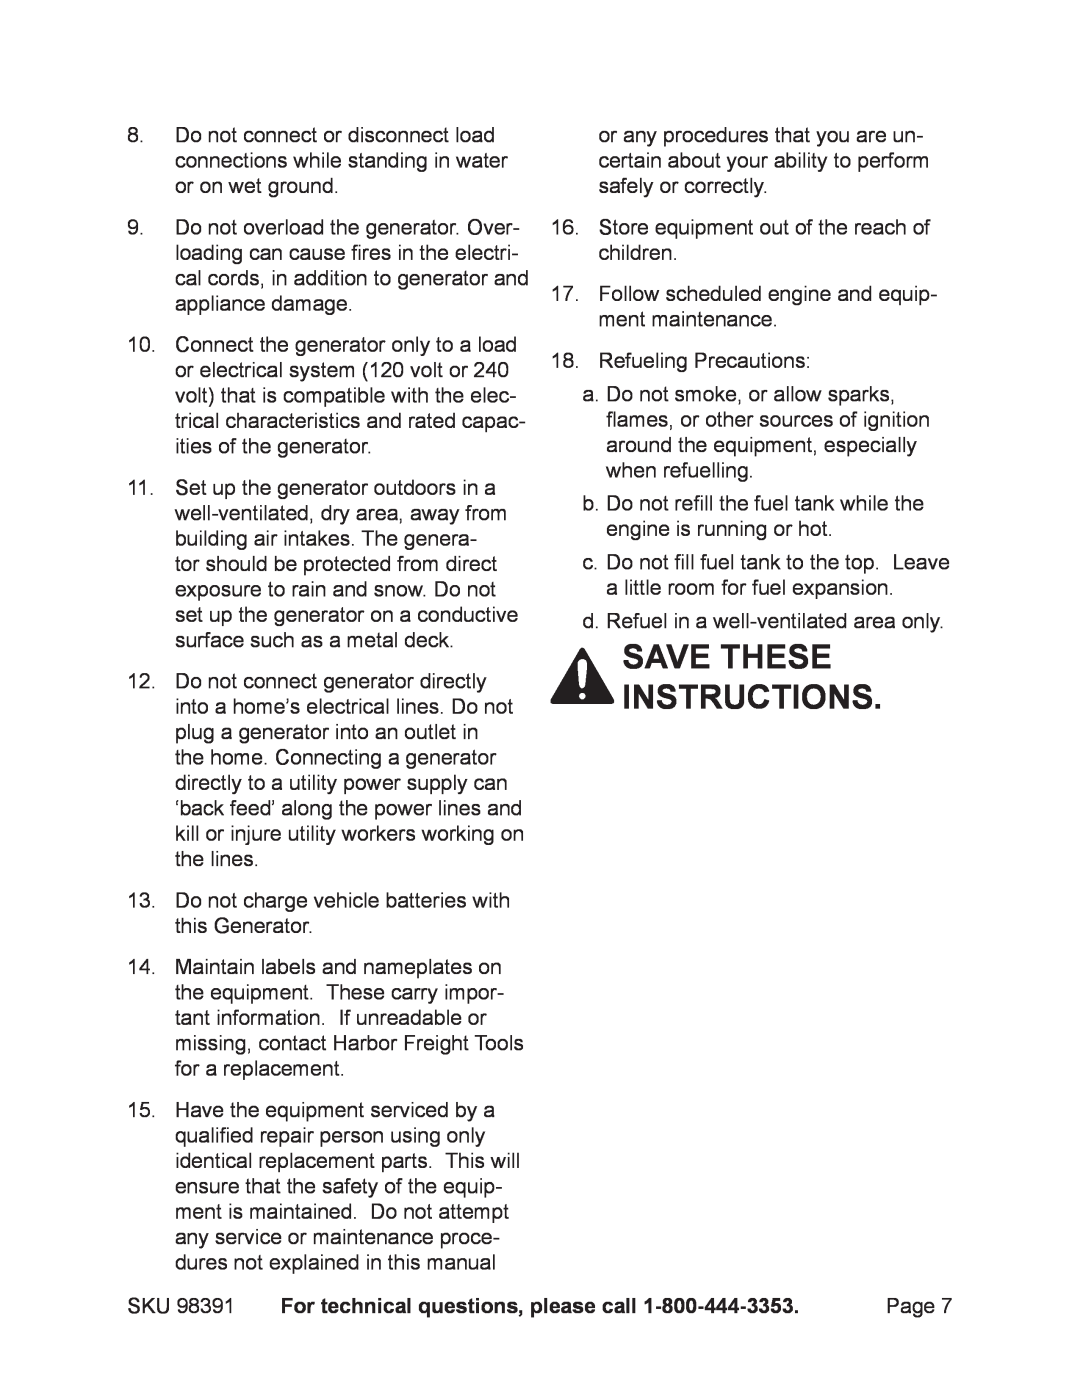 Chicago Electric 98391 manual Save these instructions, For technical questions, please call 